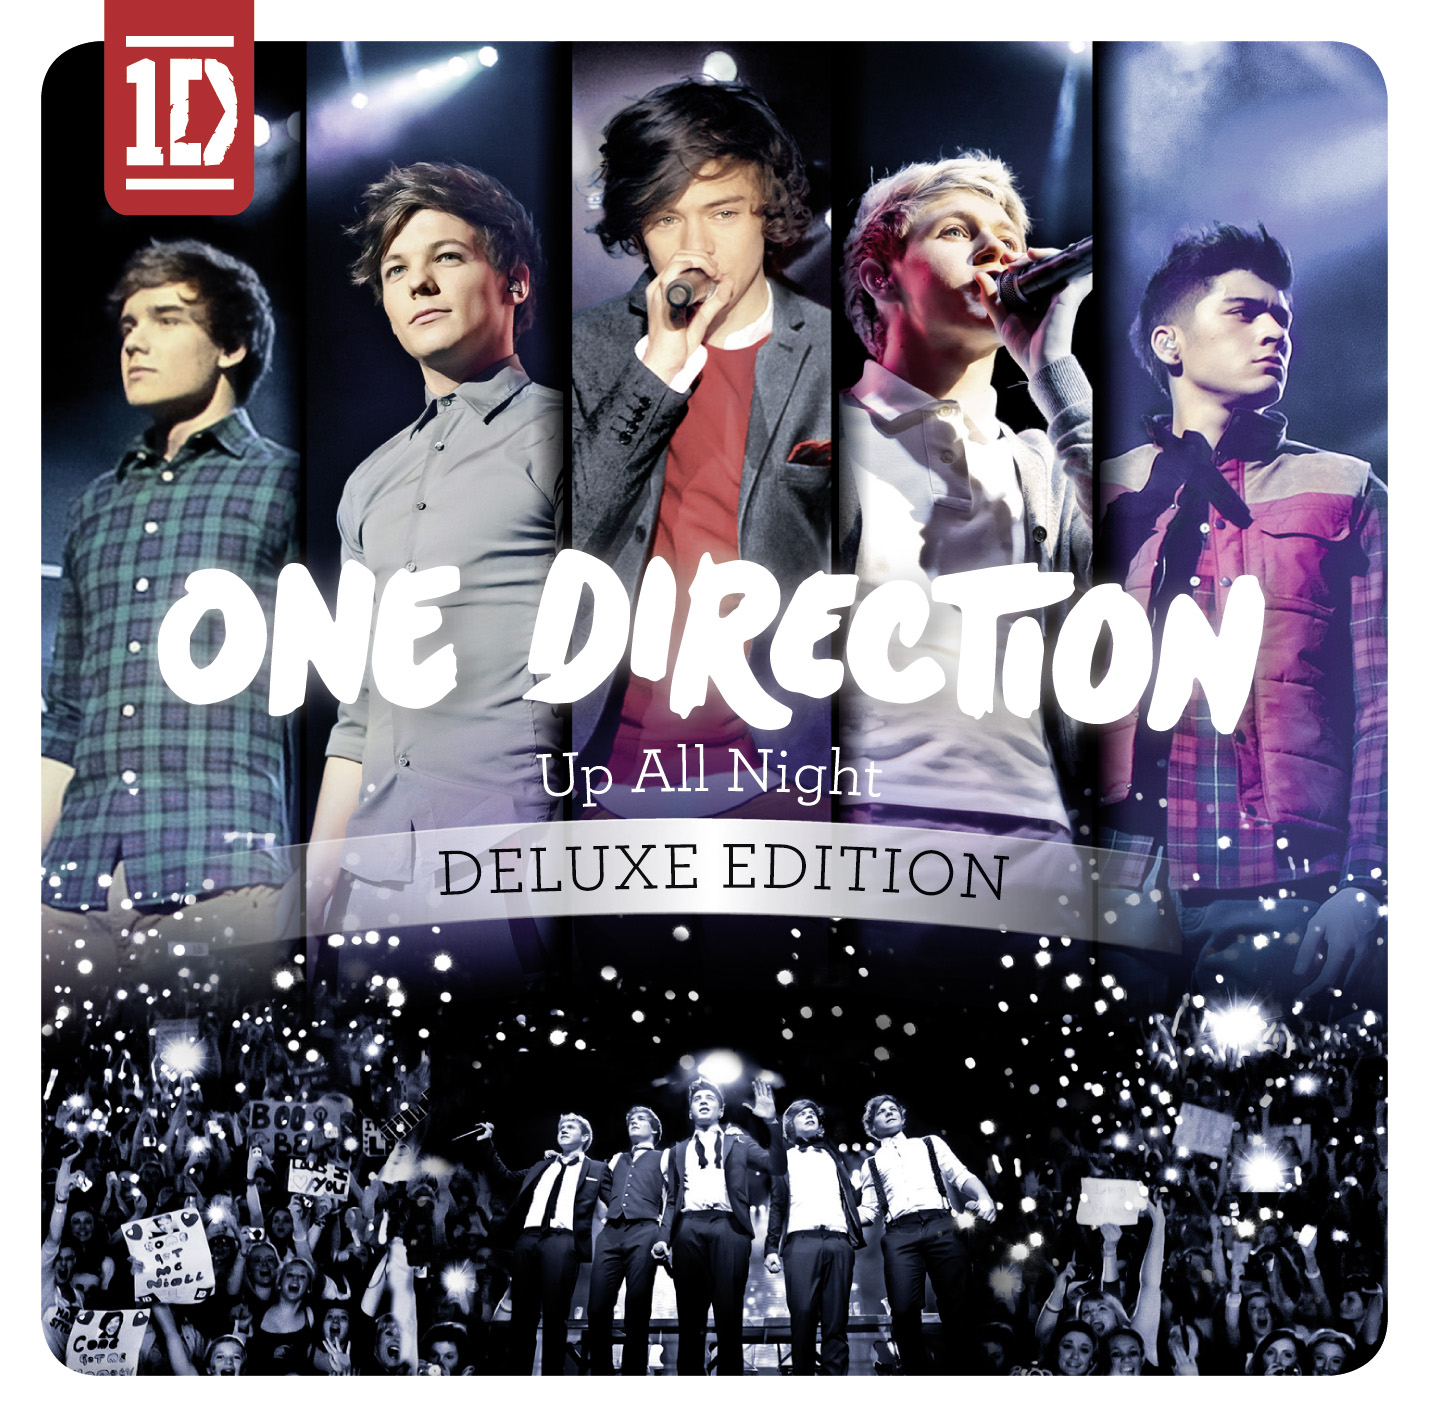 One Direction Up All Night Deluxe Album Tracklist